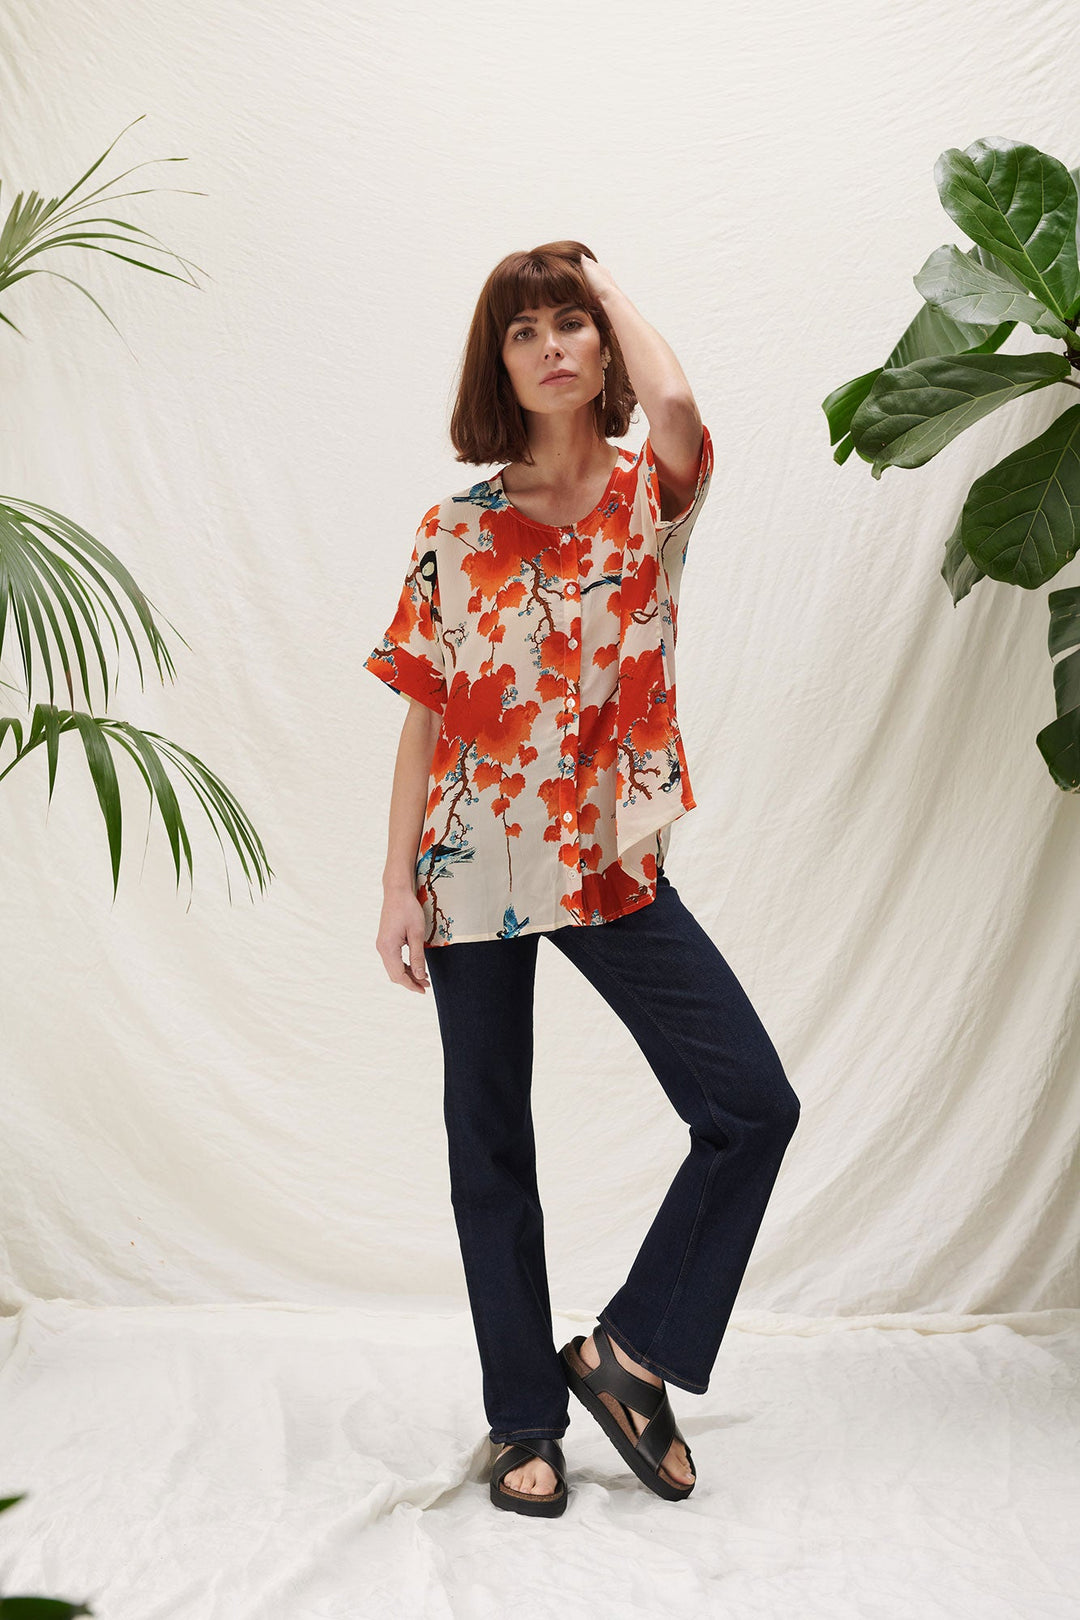 beautiful ethical tea blouse with red leafy print by one hundred stars